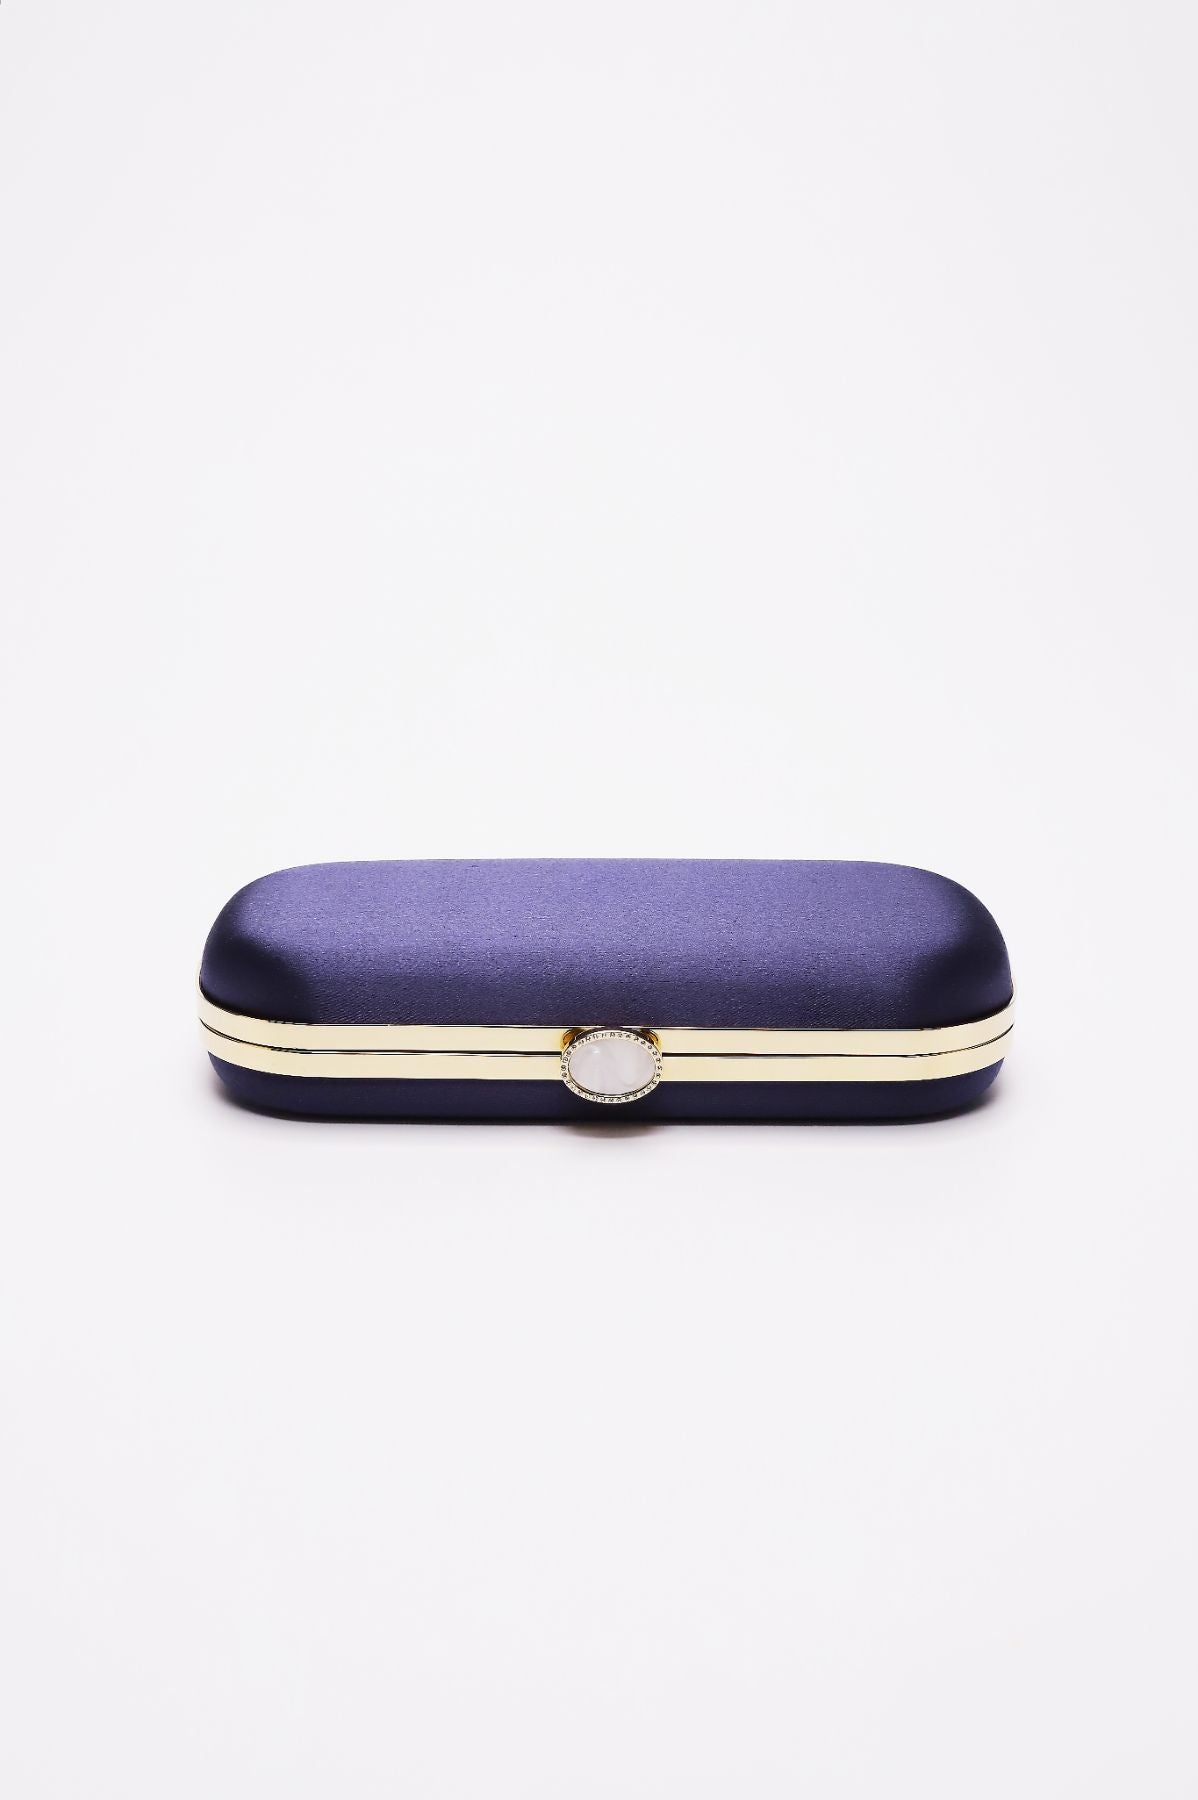 The Bella Rosa Collection&#39;s Navy Blue Petite Bella Clutch with white trim and central clasp on a white background.